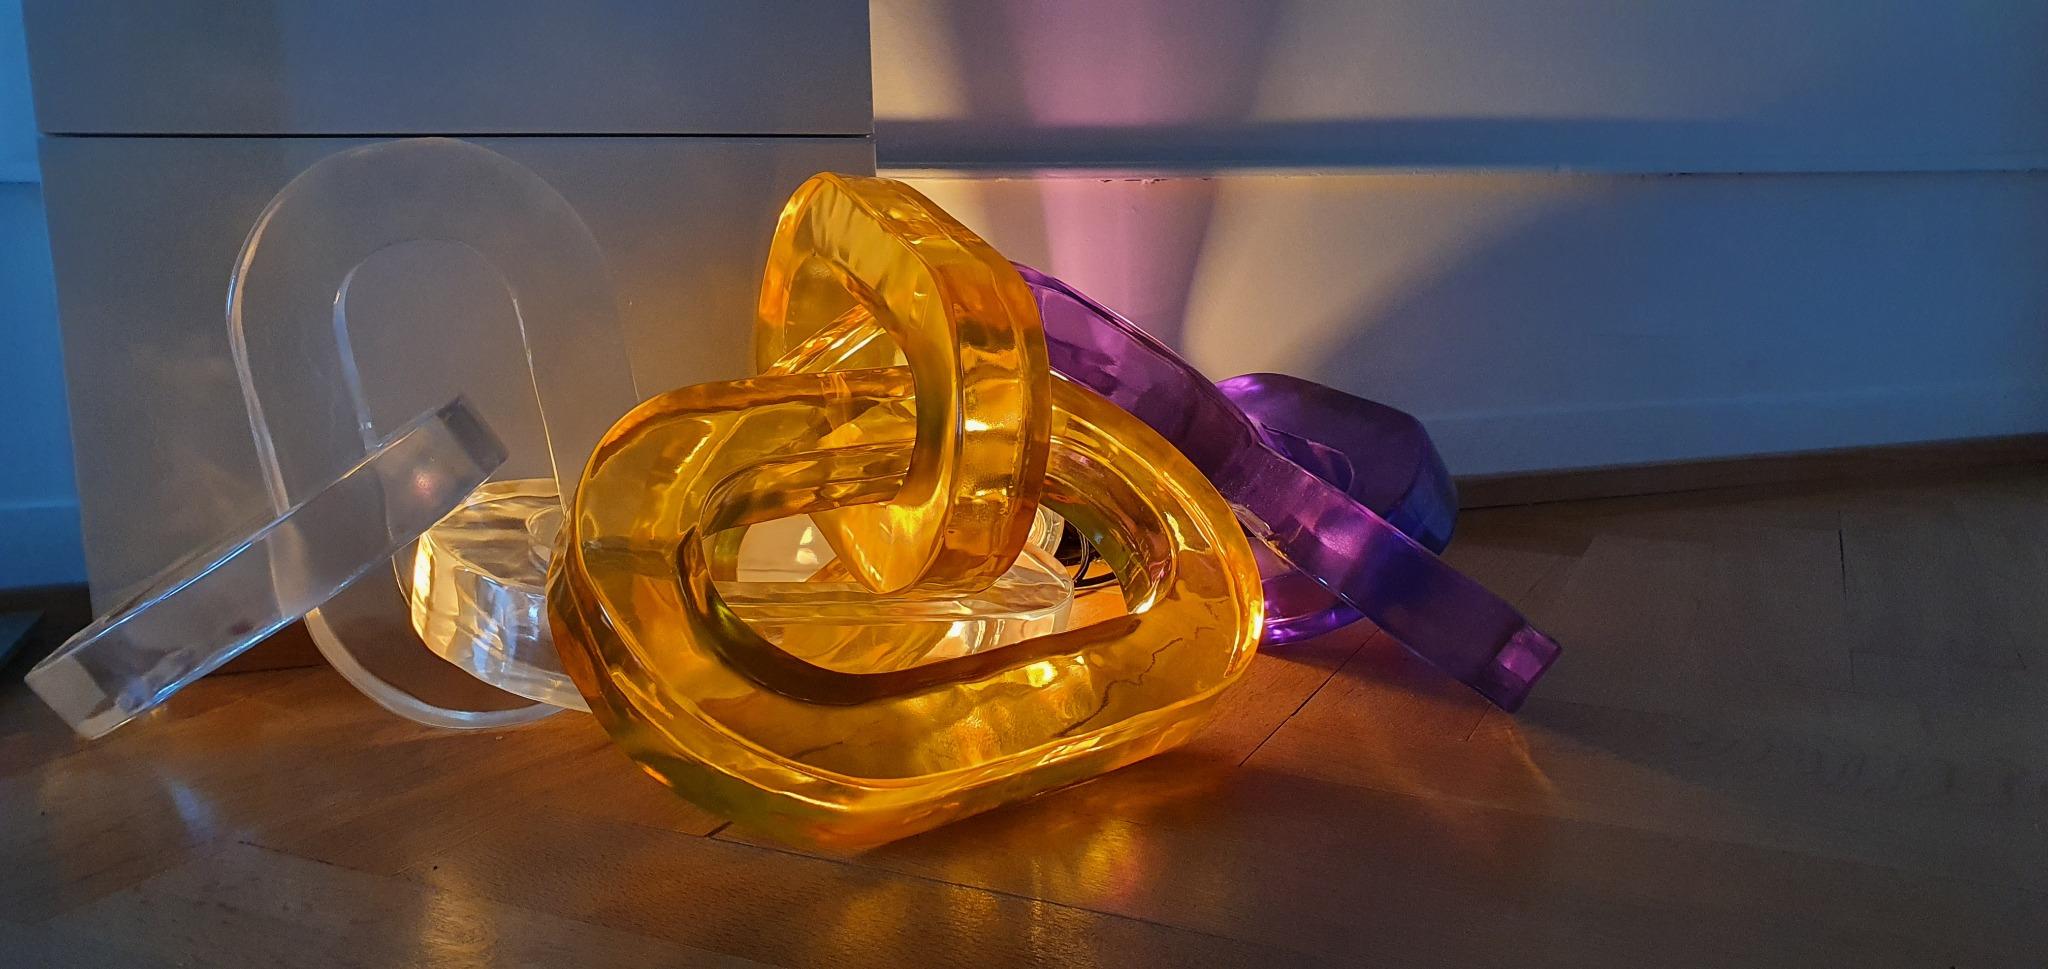 Amethyst Colour “LIAISON” with 3 links, Cold Casted Hand Finished Resin - Sculpture by Cedric Koukjian